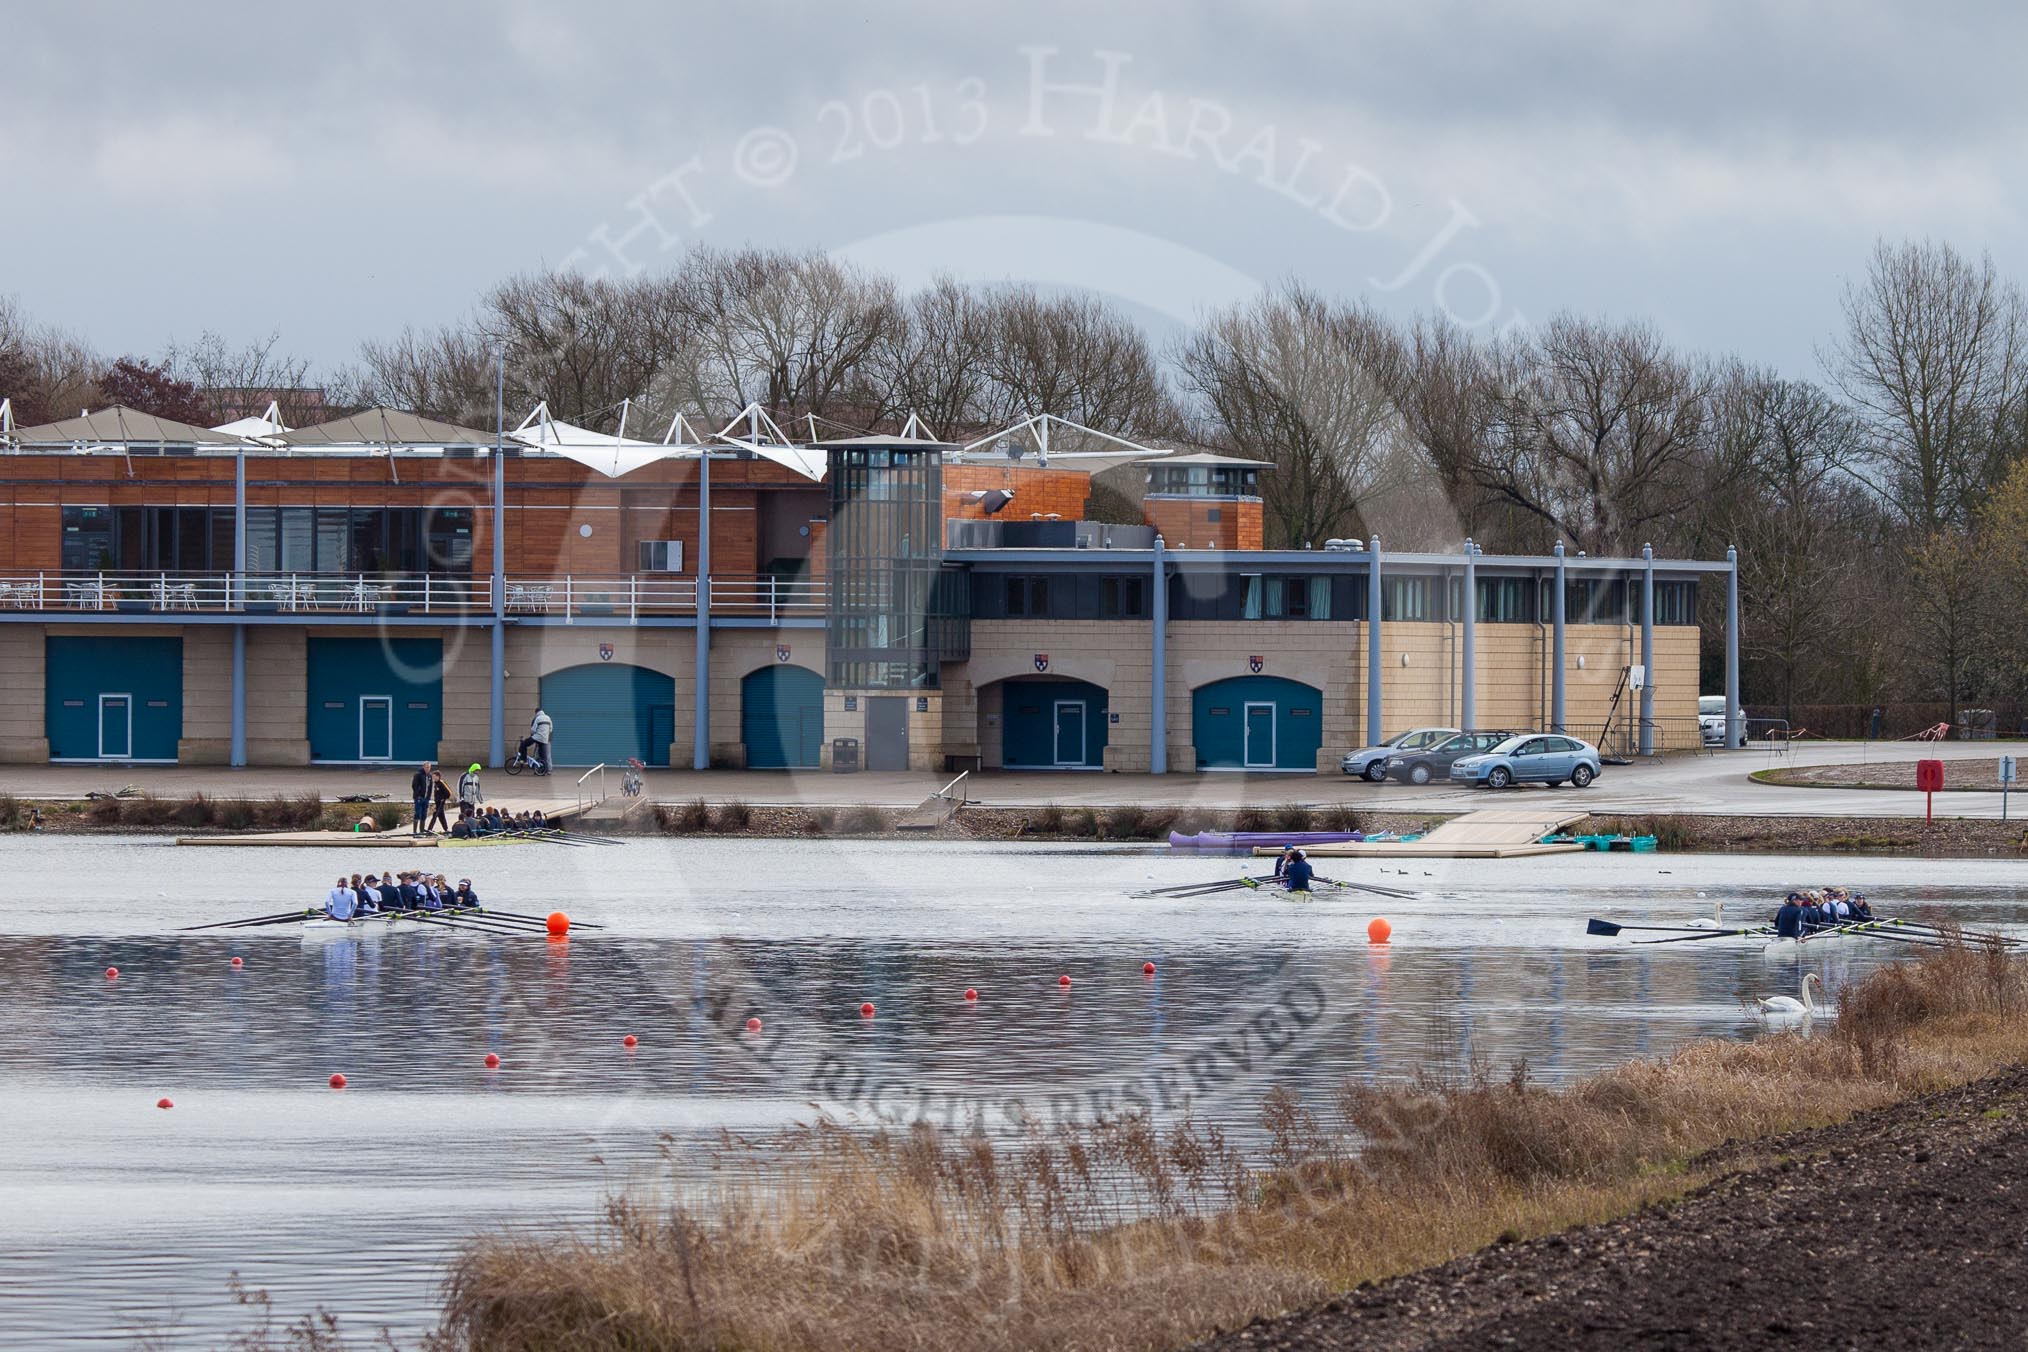 The Boat Race season 2013 - fixture OUWBC vs Olympians: Getting ready for a fixture at Dorney Lake, in front of the boathouse: On the left the OUWBC reserve boat Osiris, on their right the Olympians, on the very right the OUWBC Blue Boat..
Dorney Lake,
Dorney, Windsor,
Buckinghamshire,
United Kingdom,
on 16 March 2013 at 11:54, image #114